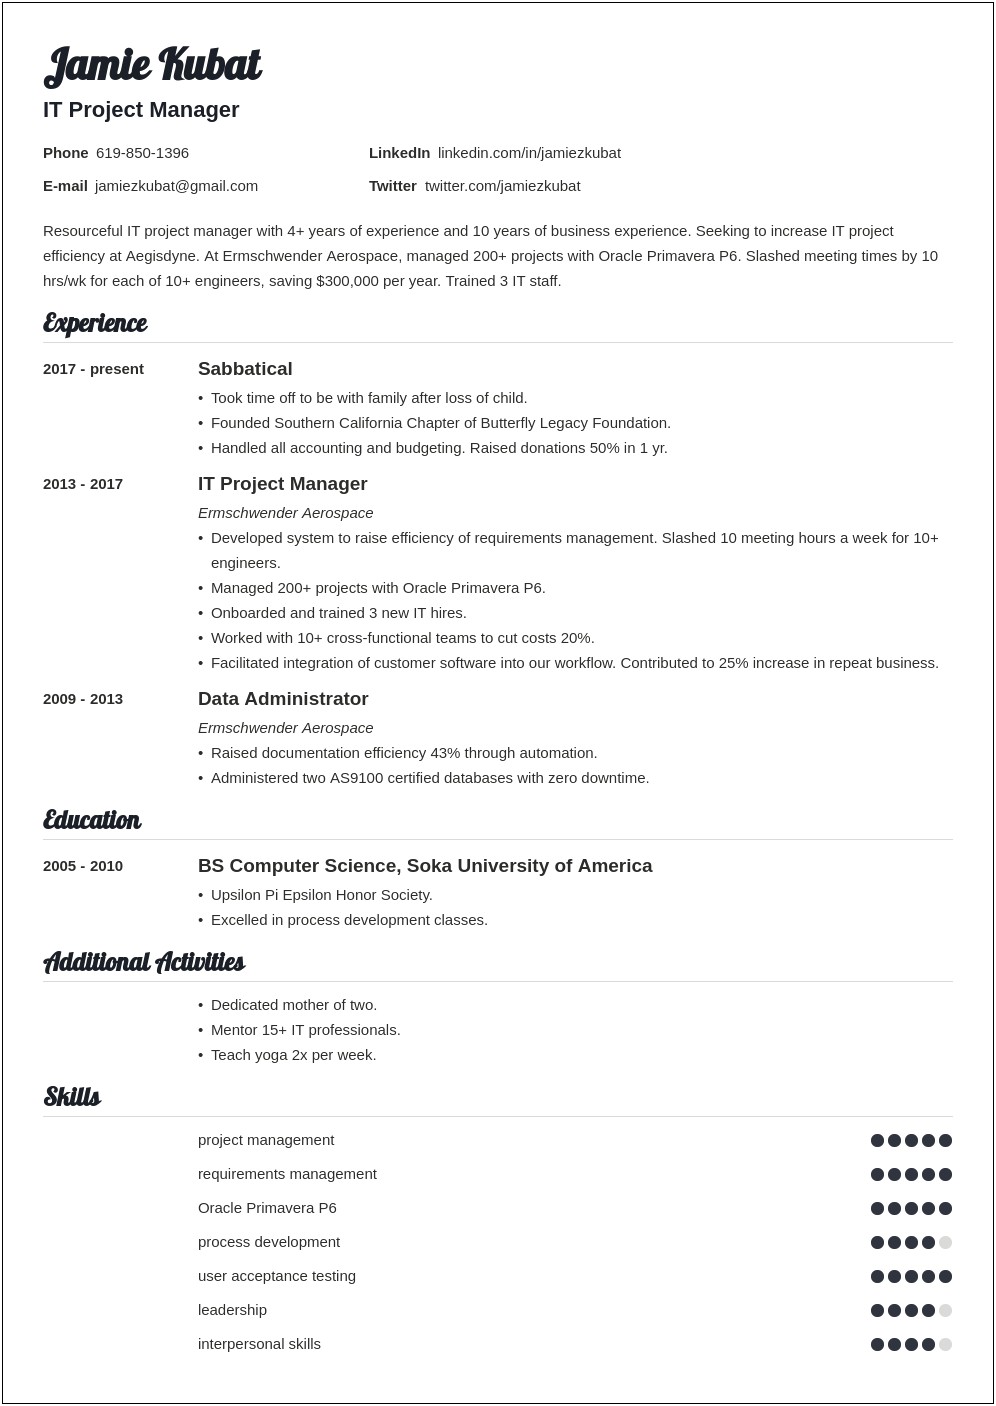 Should I Mention Short Term Jobs In Resume